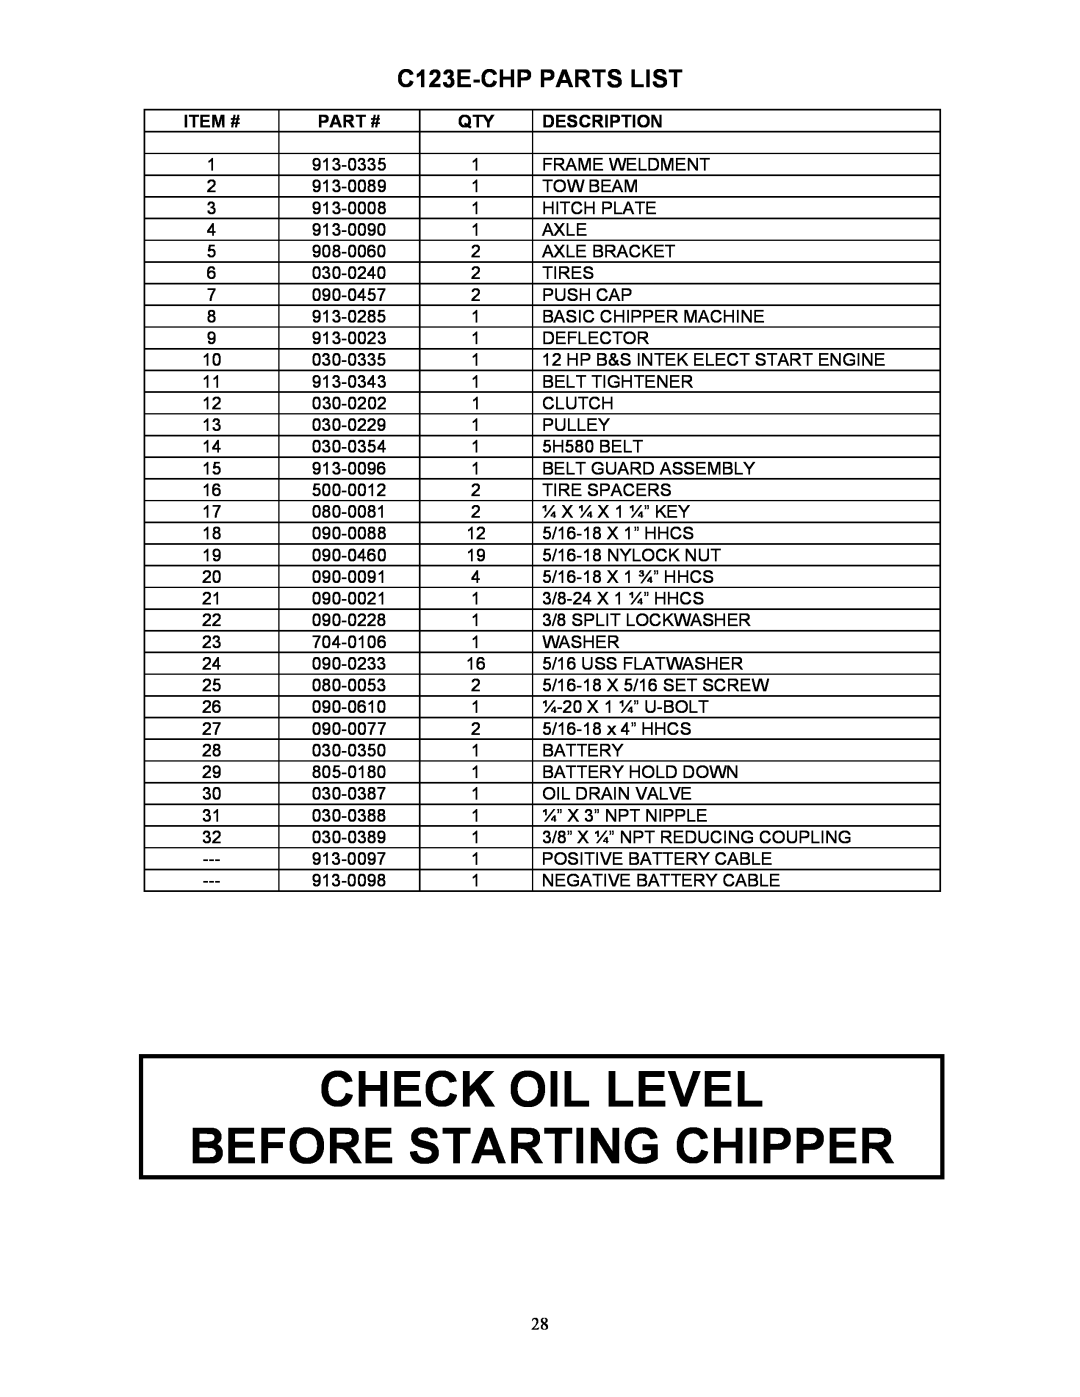 Country Home Products instruction manual Check Oil Level Before Starting Chipper, C123E-CHPPARTS LIST 